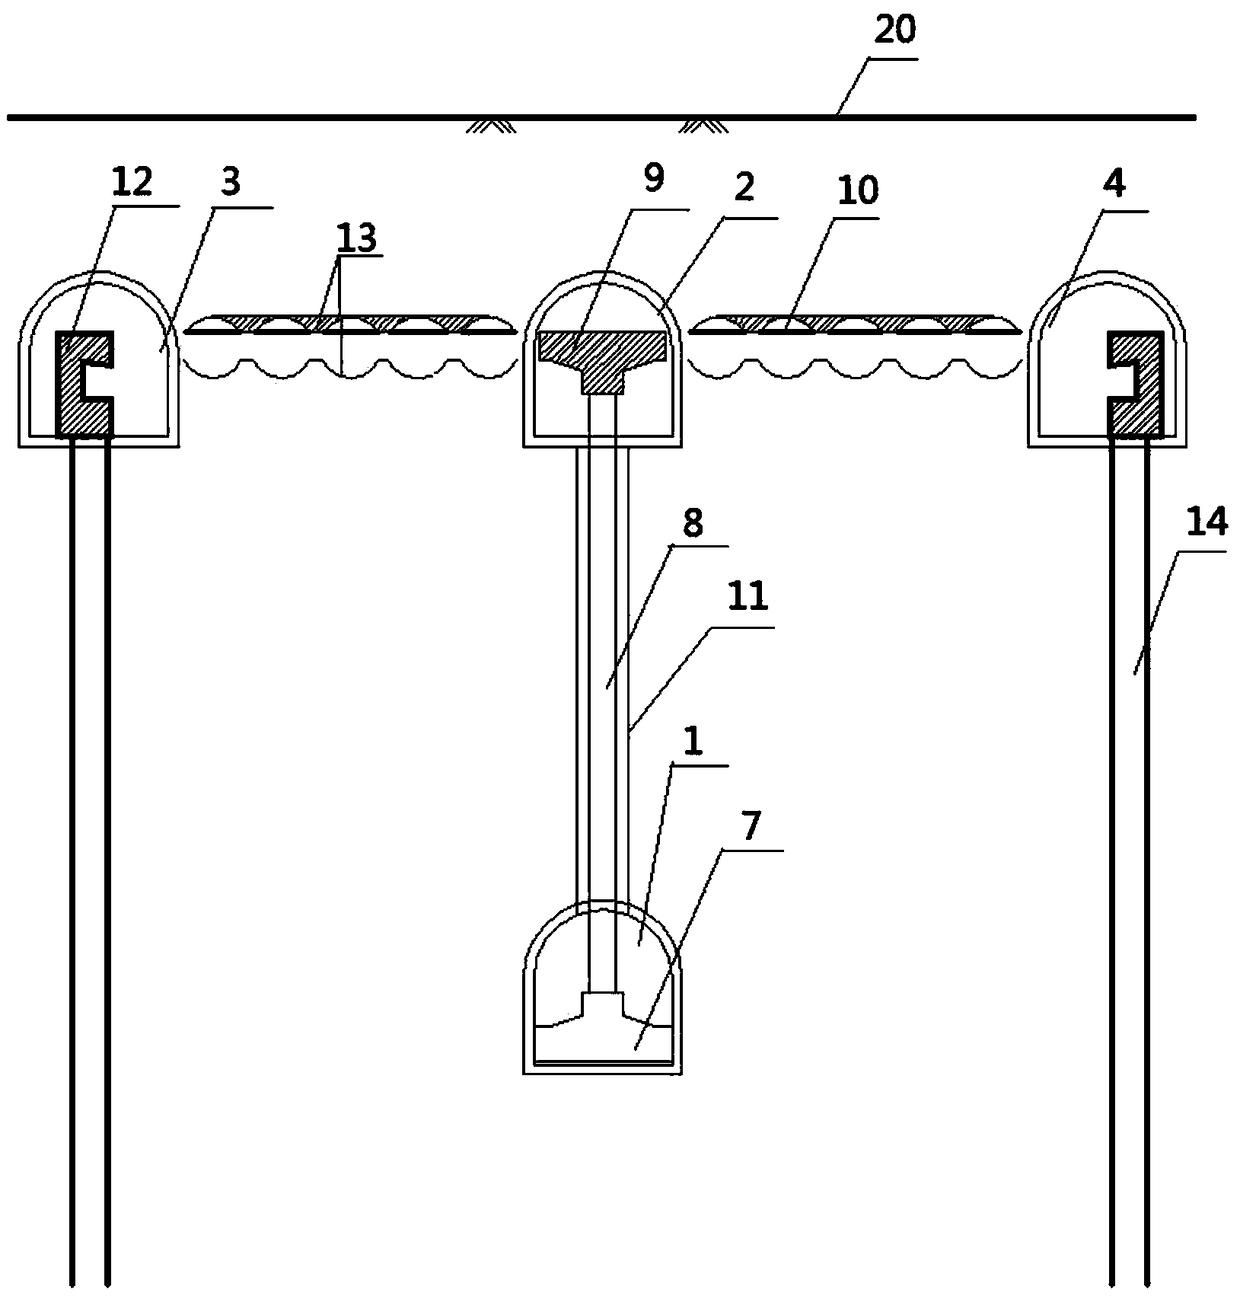 A construction method for building underground structures with large-diameter pipe jacking combined with hole piles